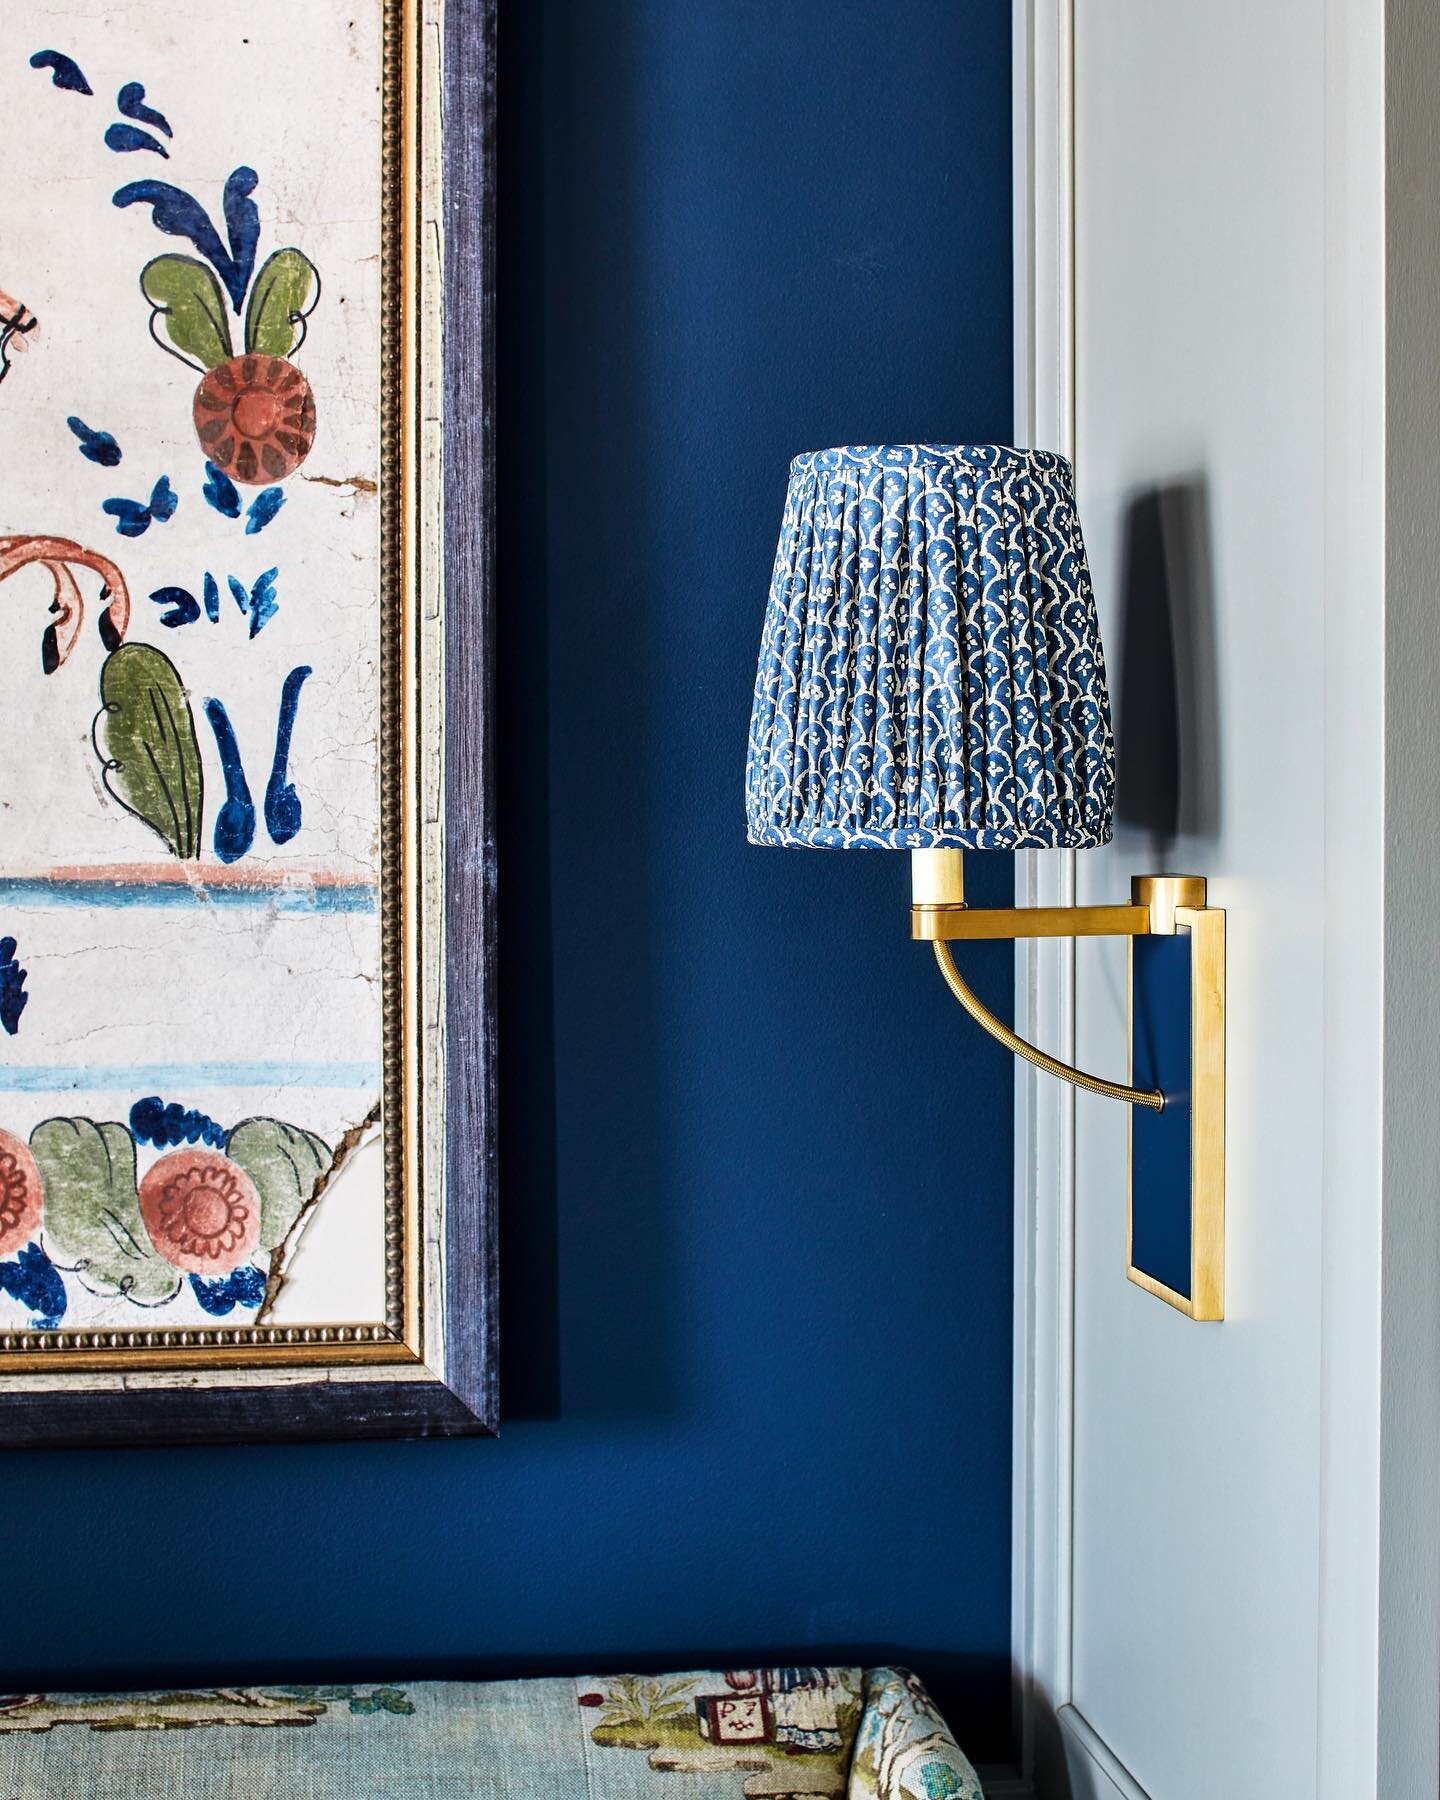 I&rsquo;m ready for my close up! #tbt to our foggy bottom project from 2020! Featured here is an up close and personal shot of the Hockney wall sconce @urbanelectricco custom colored in Hague Blue @farrowandball. The finishing touch features a pleate